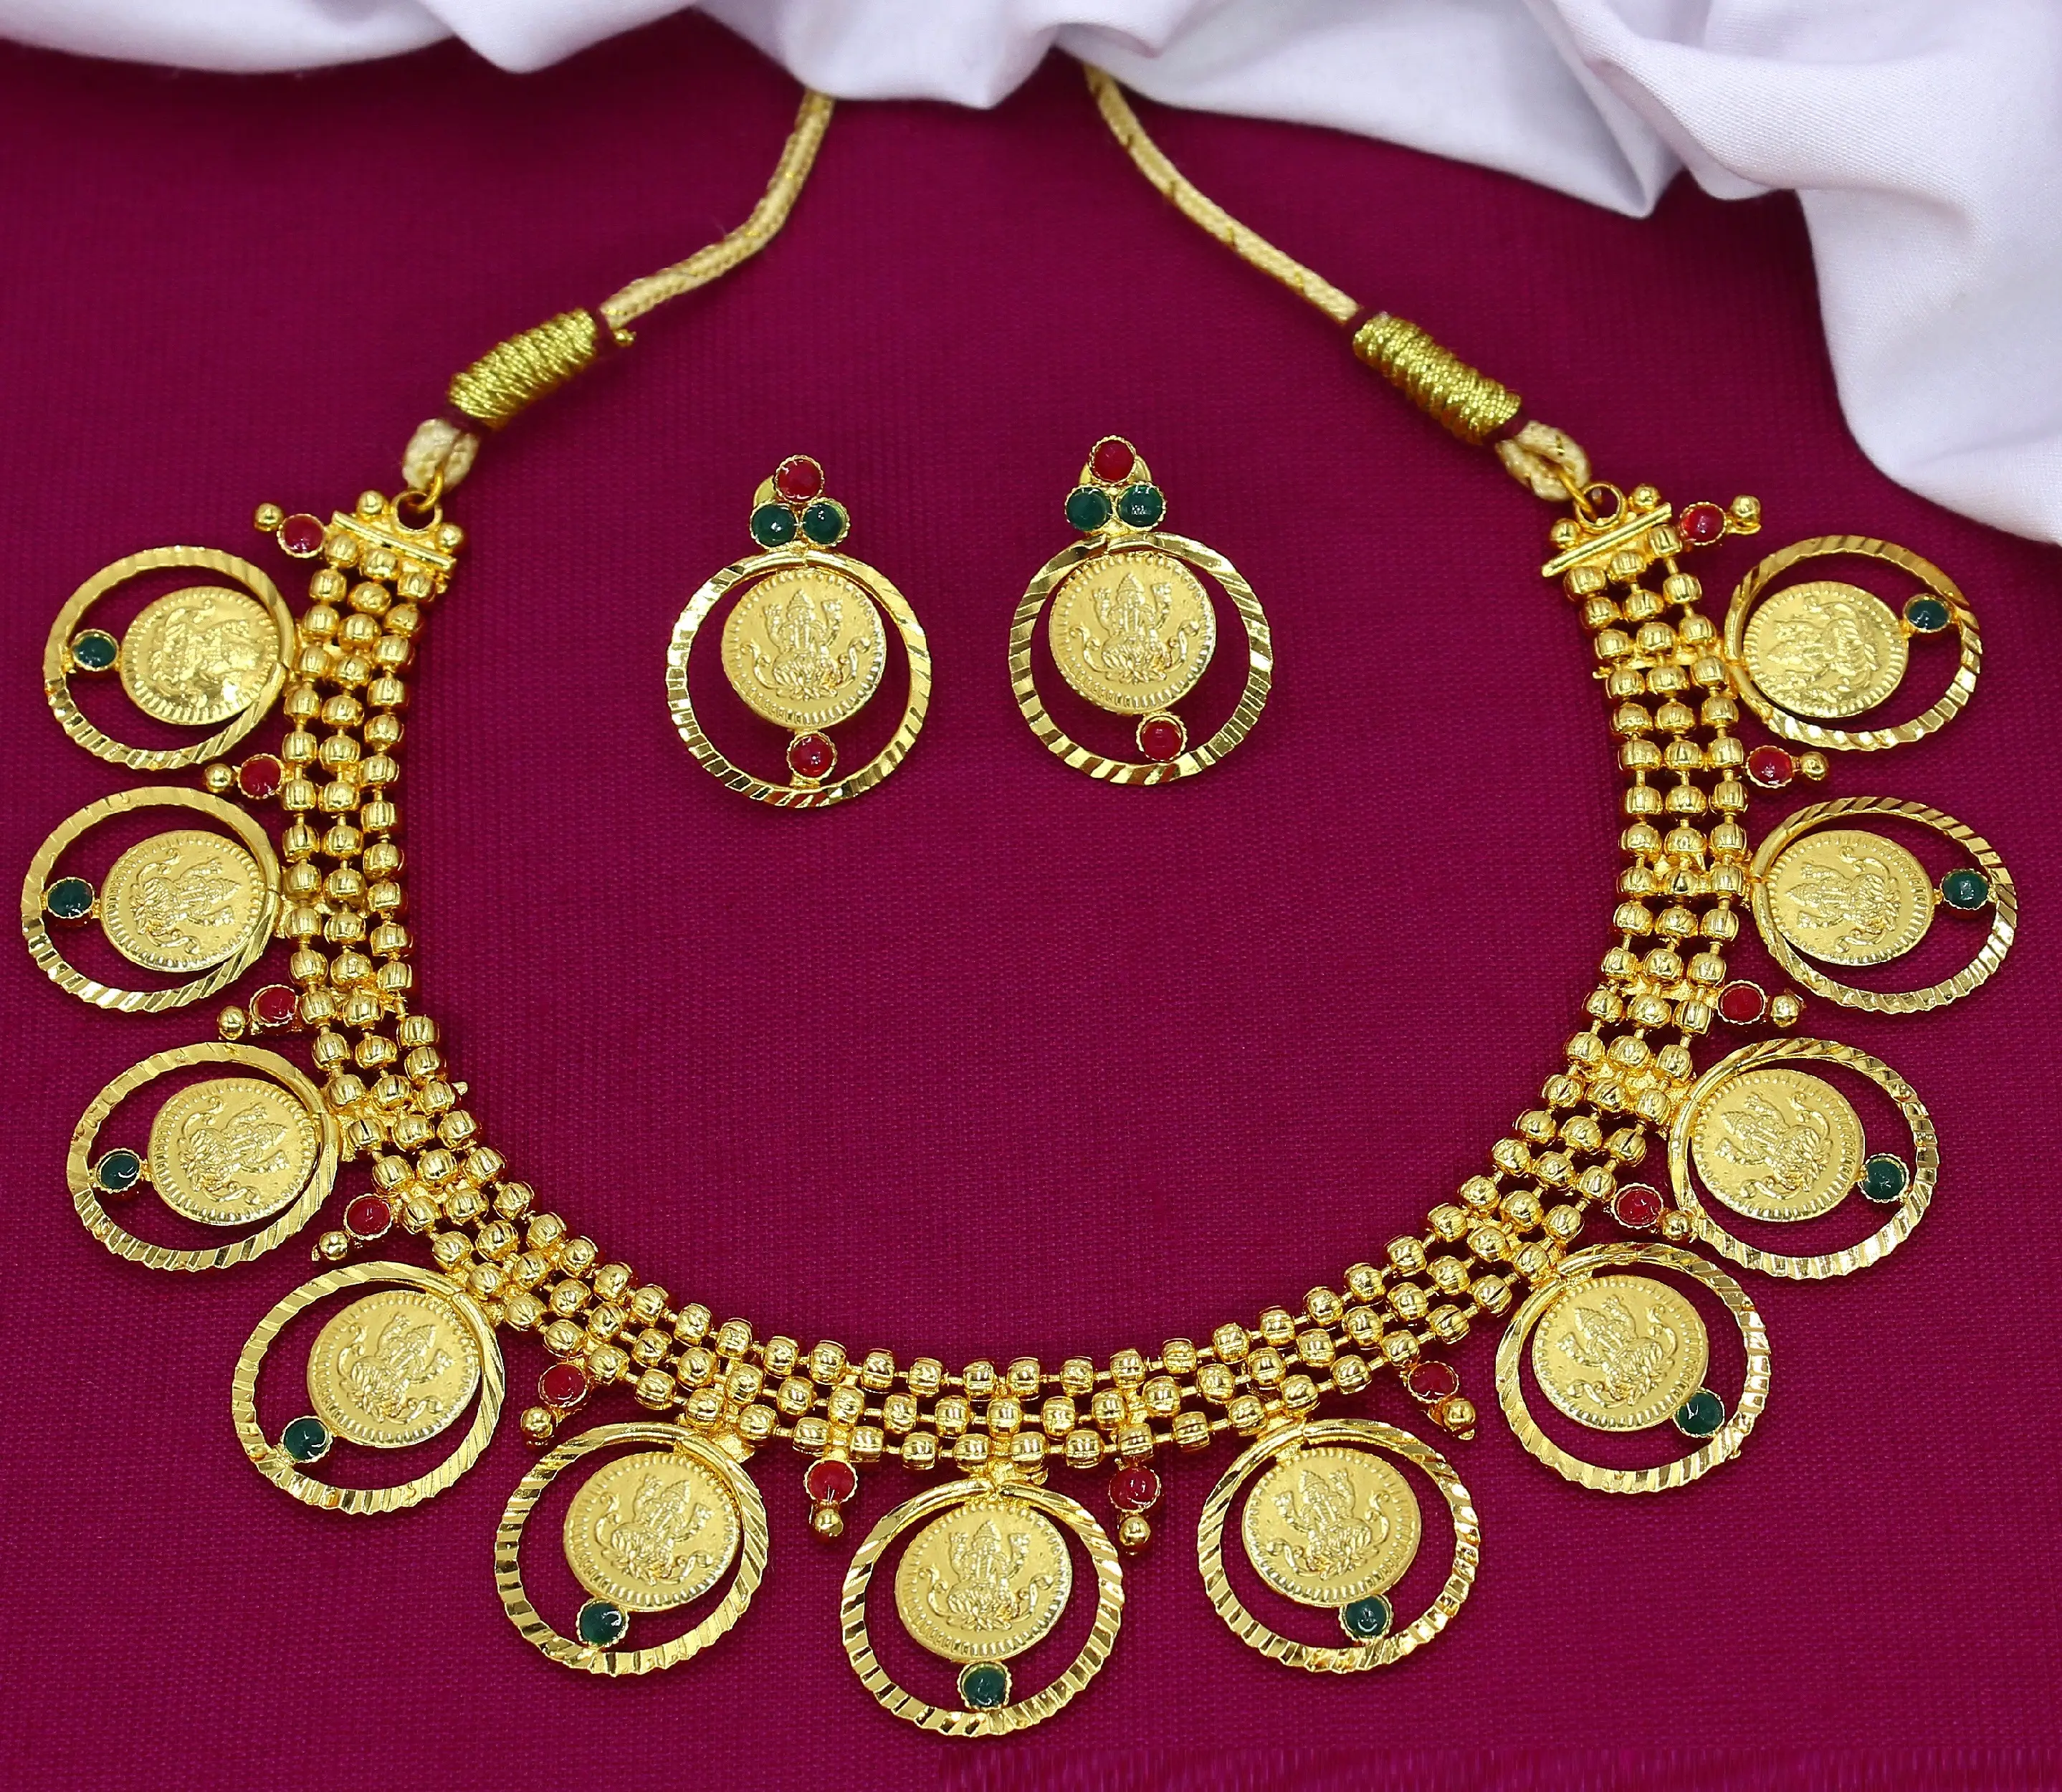 Necklace with earrings jewellery set goldplated pure brass uae indian jewellery necklace coin necklace south jewellery